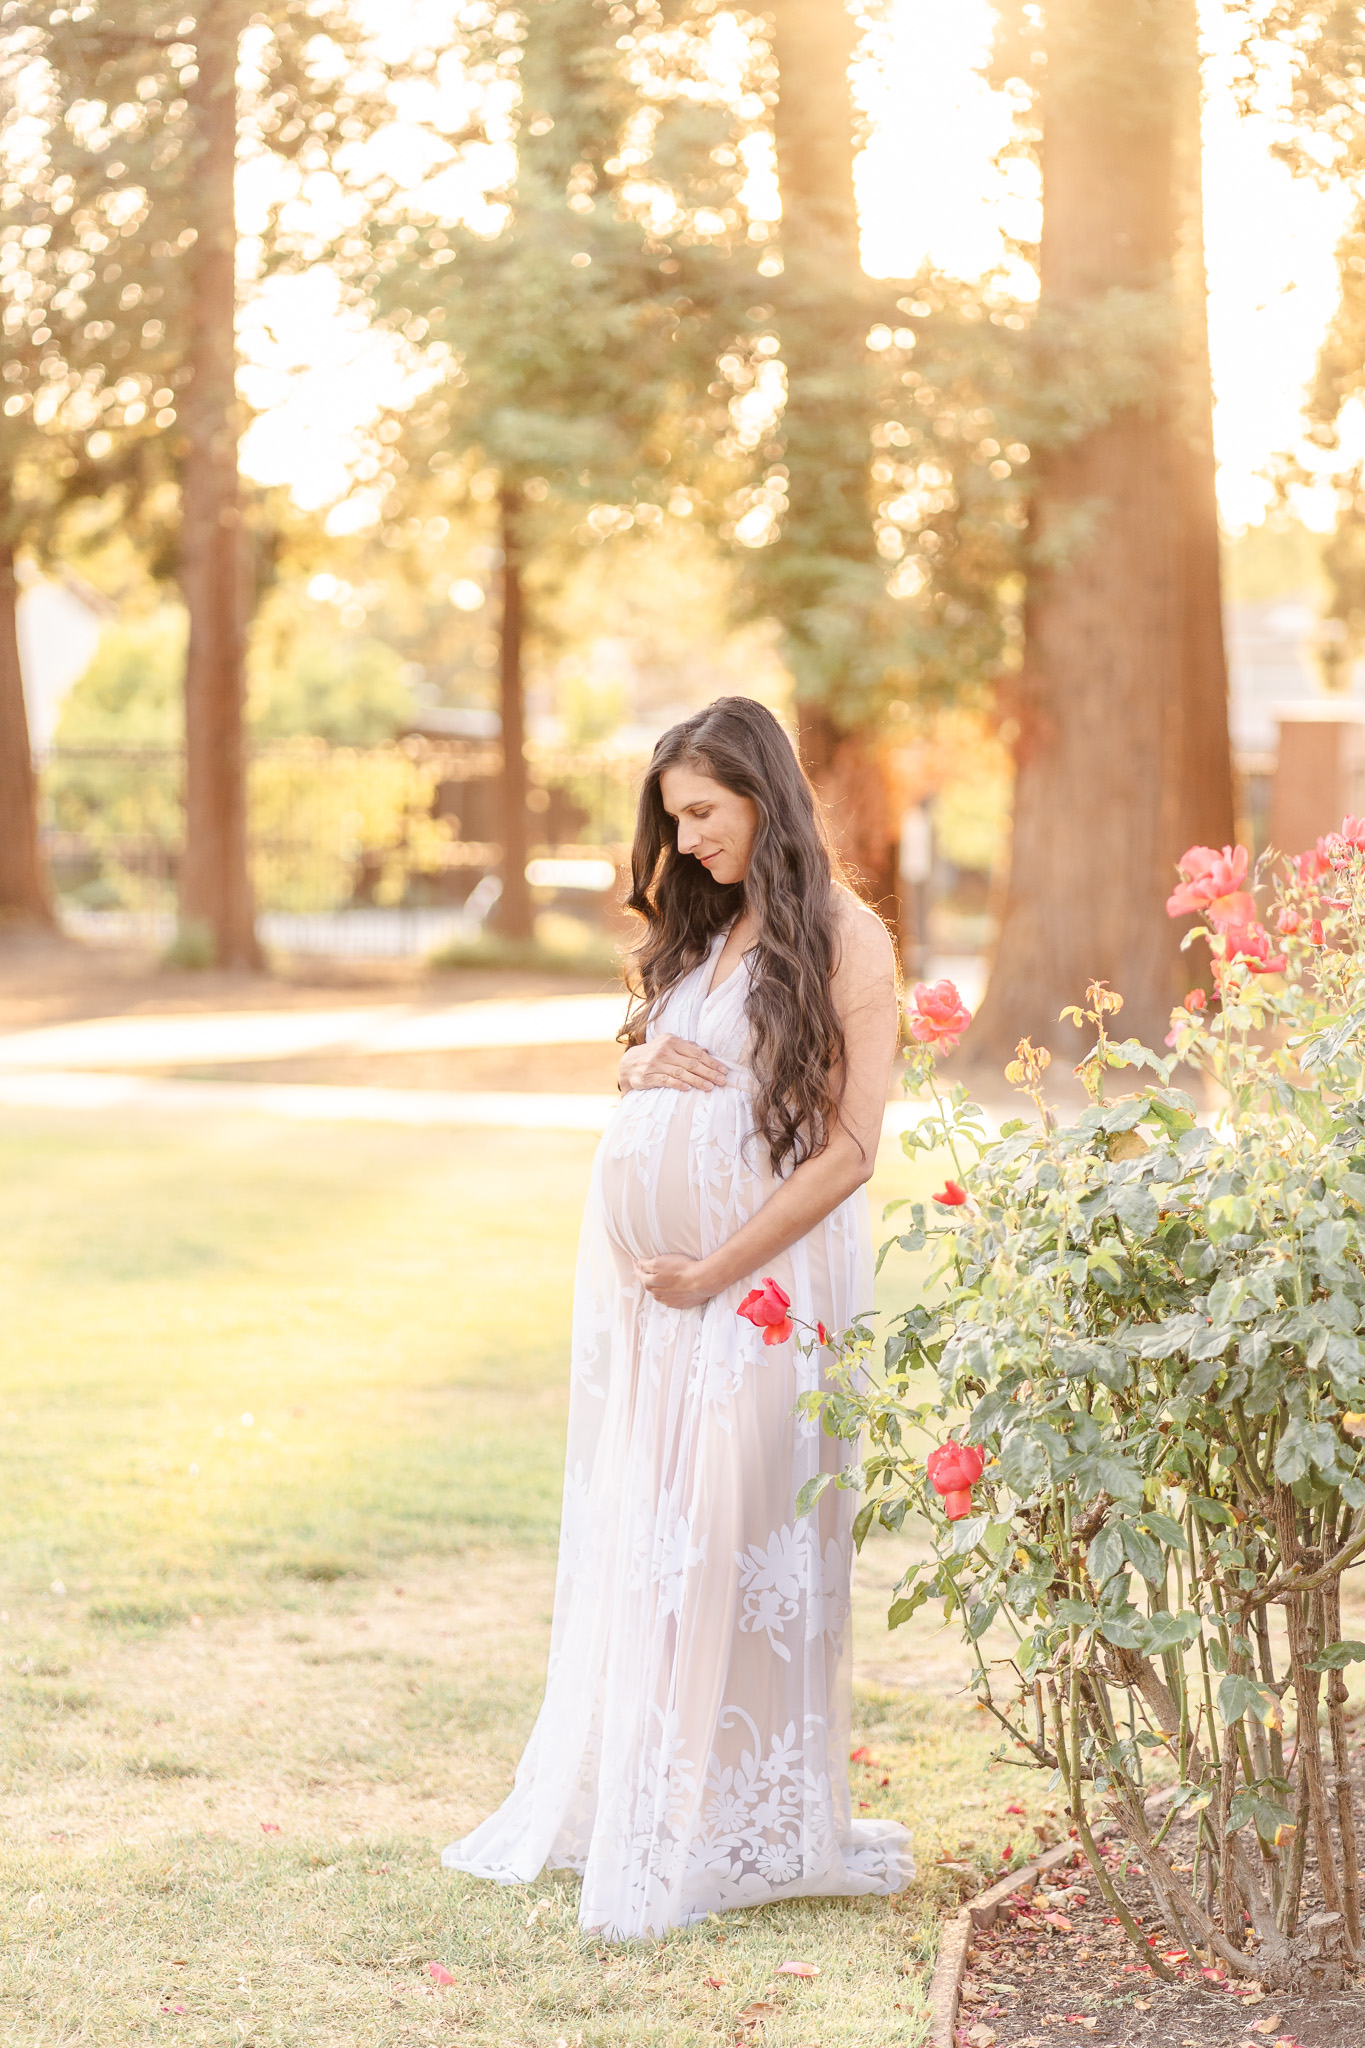 Palo alto pregnant woman in a lacy dress standing next to a rose bush with redwood trees in the background